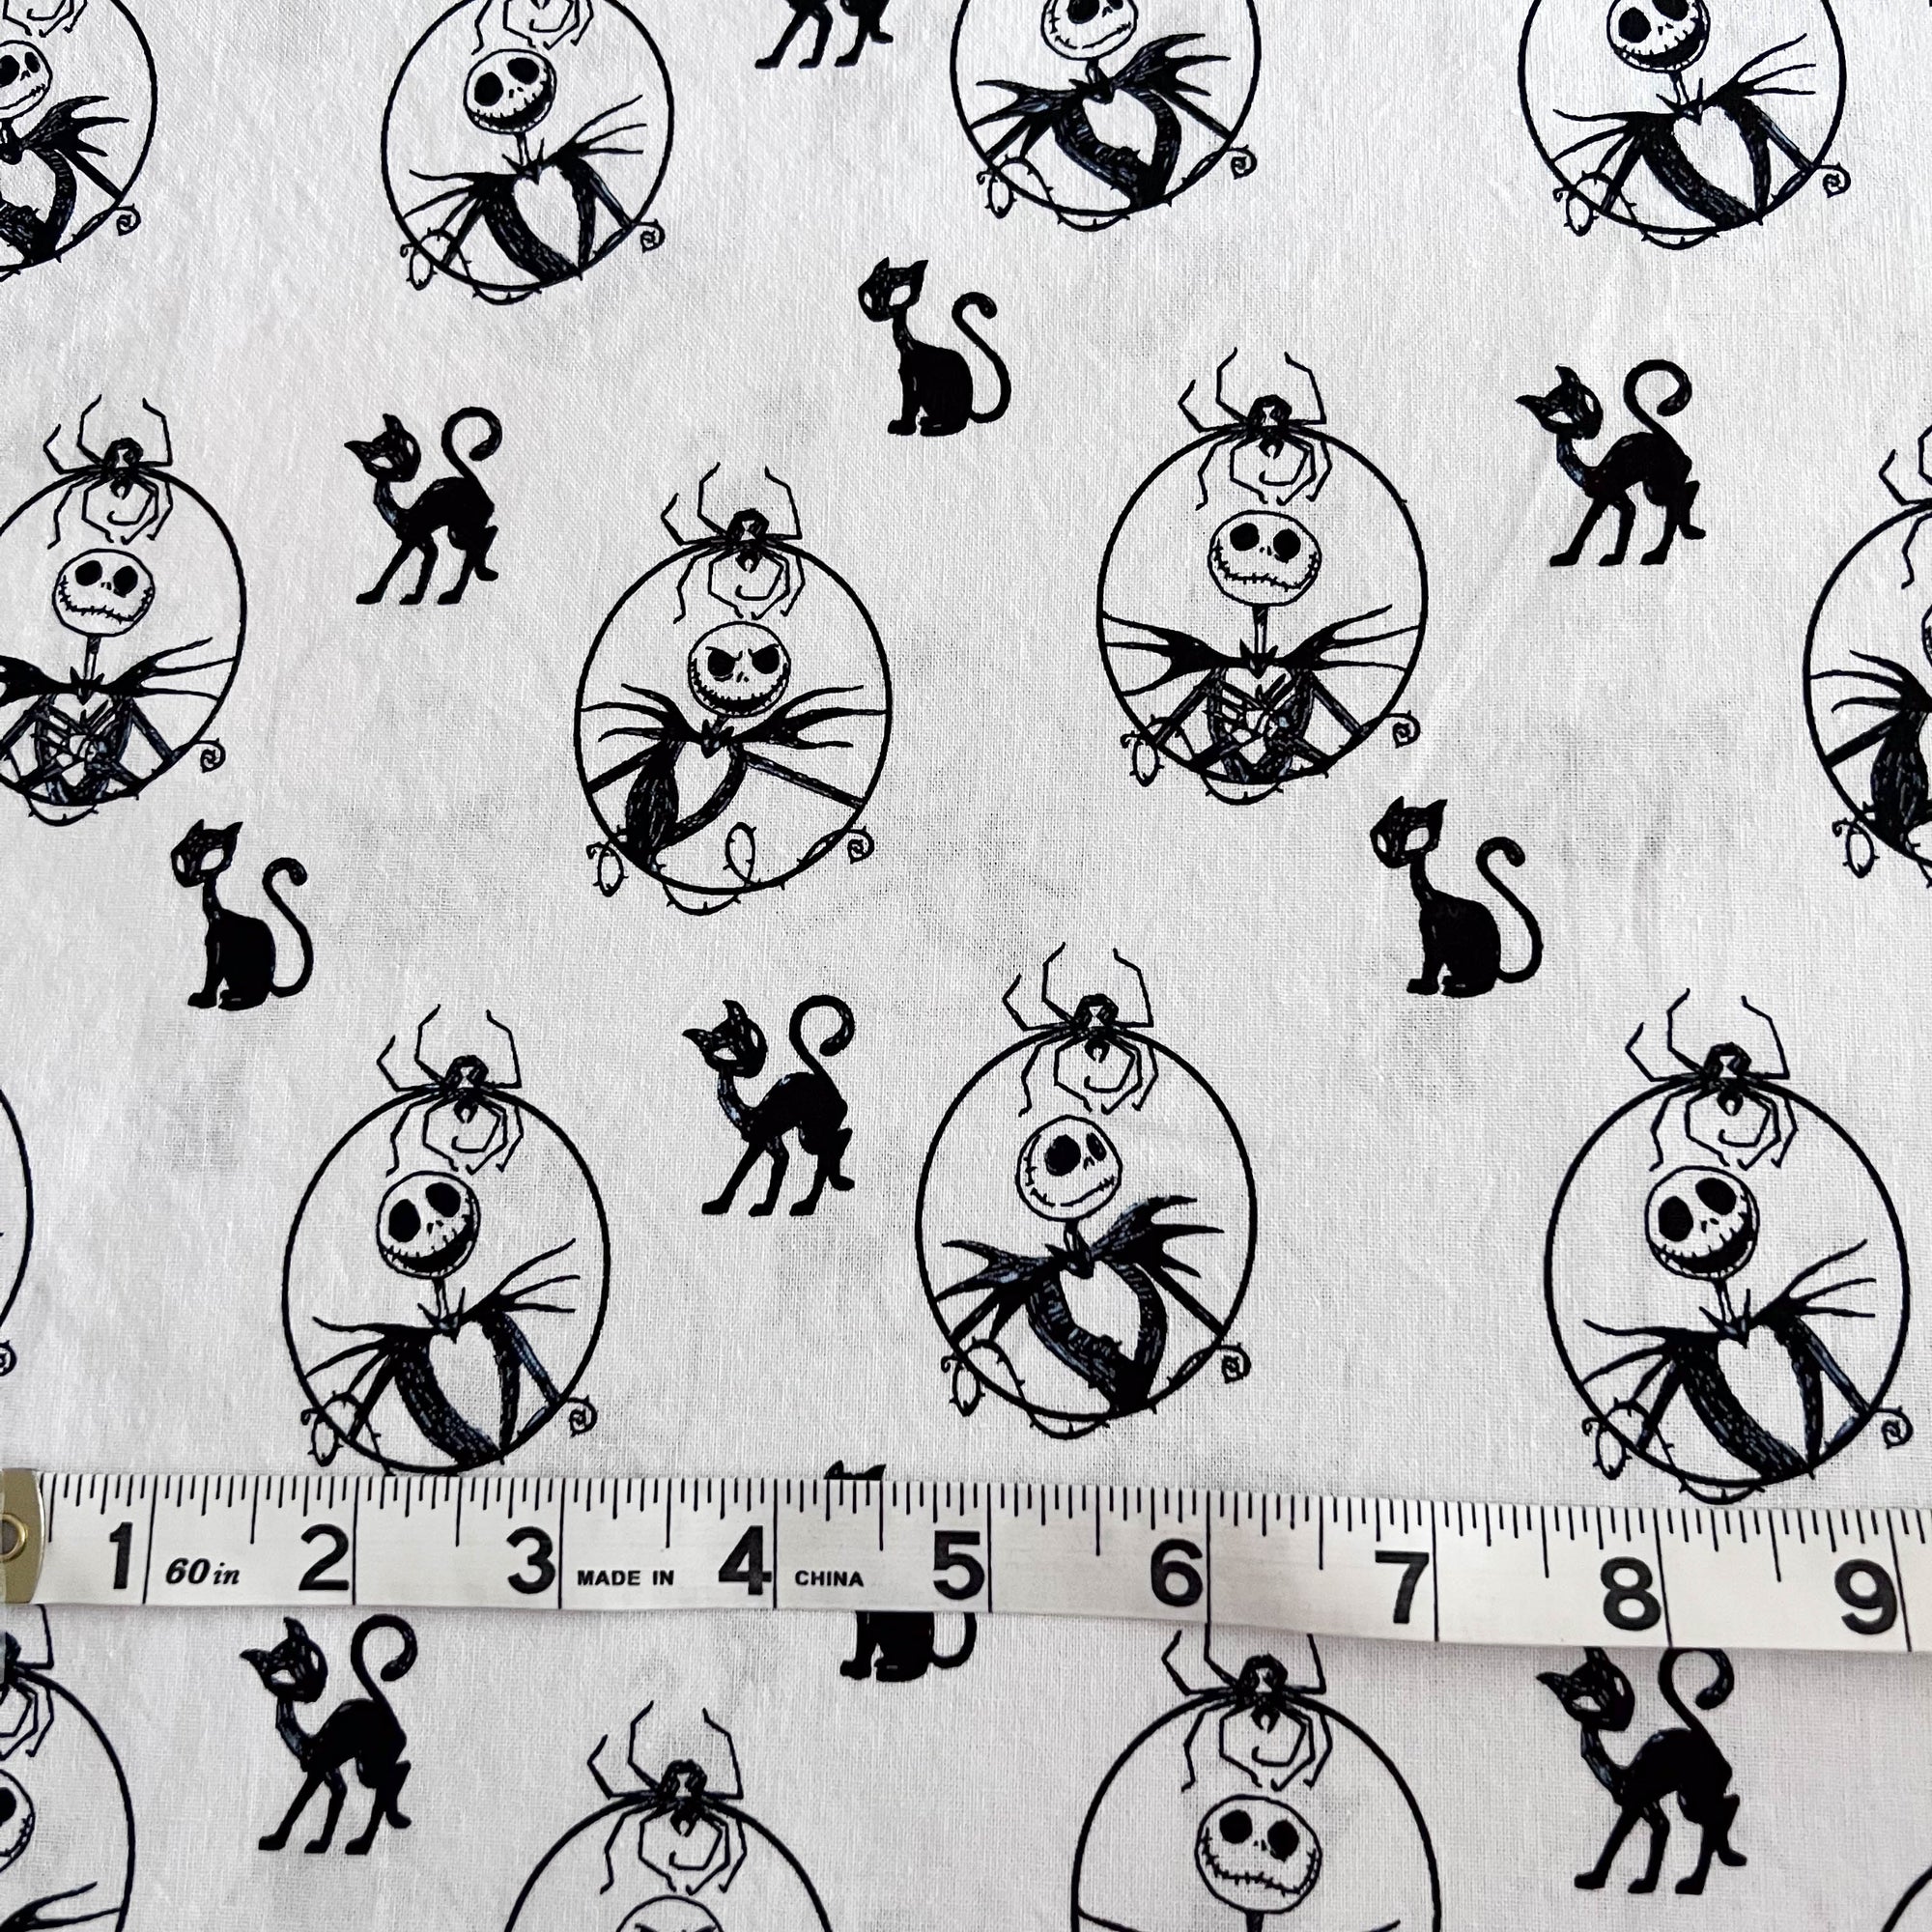 Nightmare Before Christmas Pumpkin Patch Fabric - Out of Print - 1 Yard